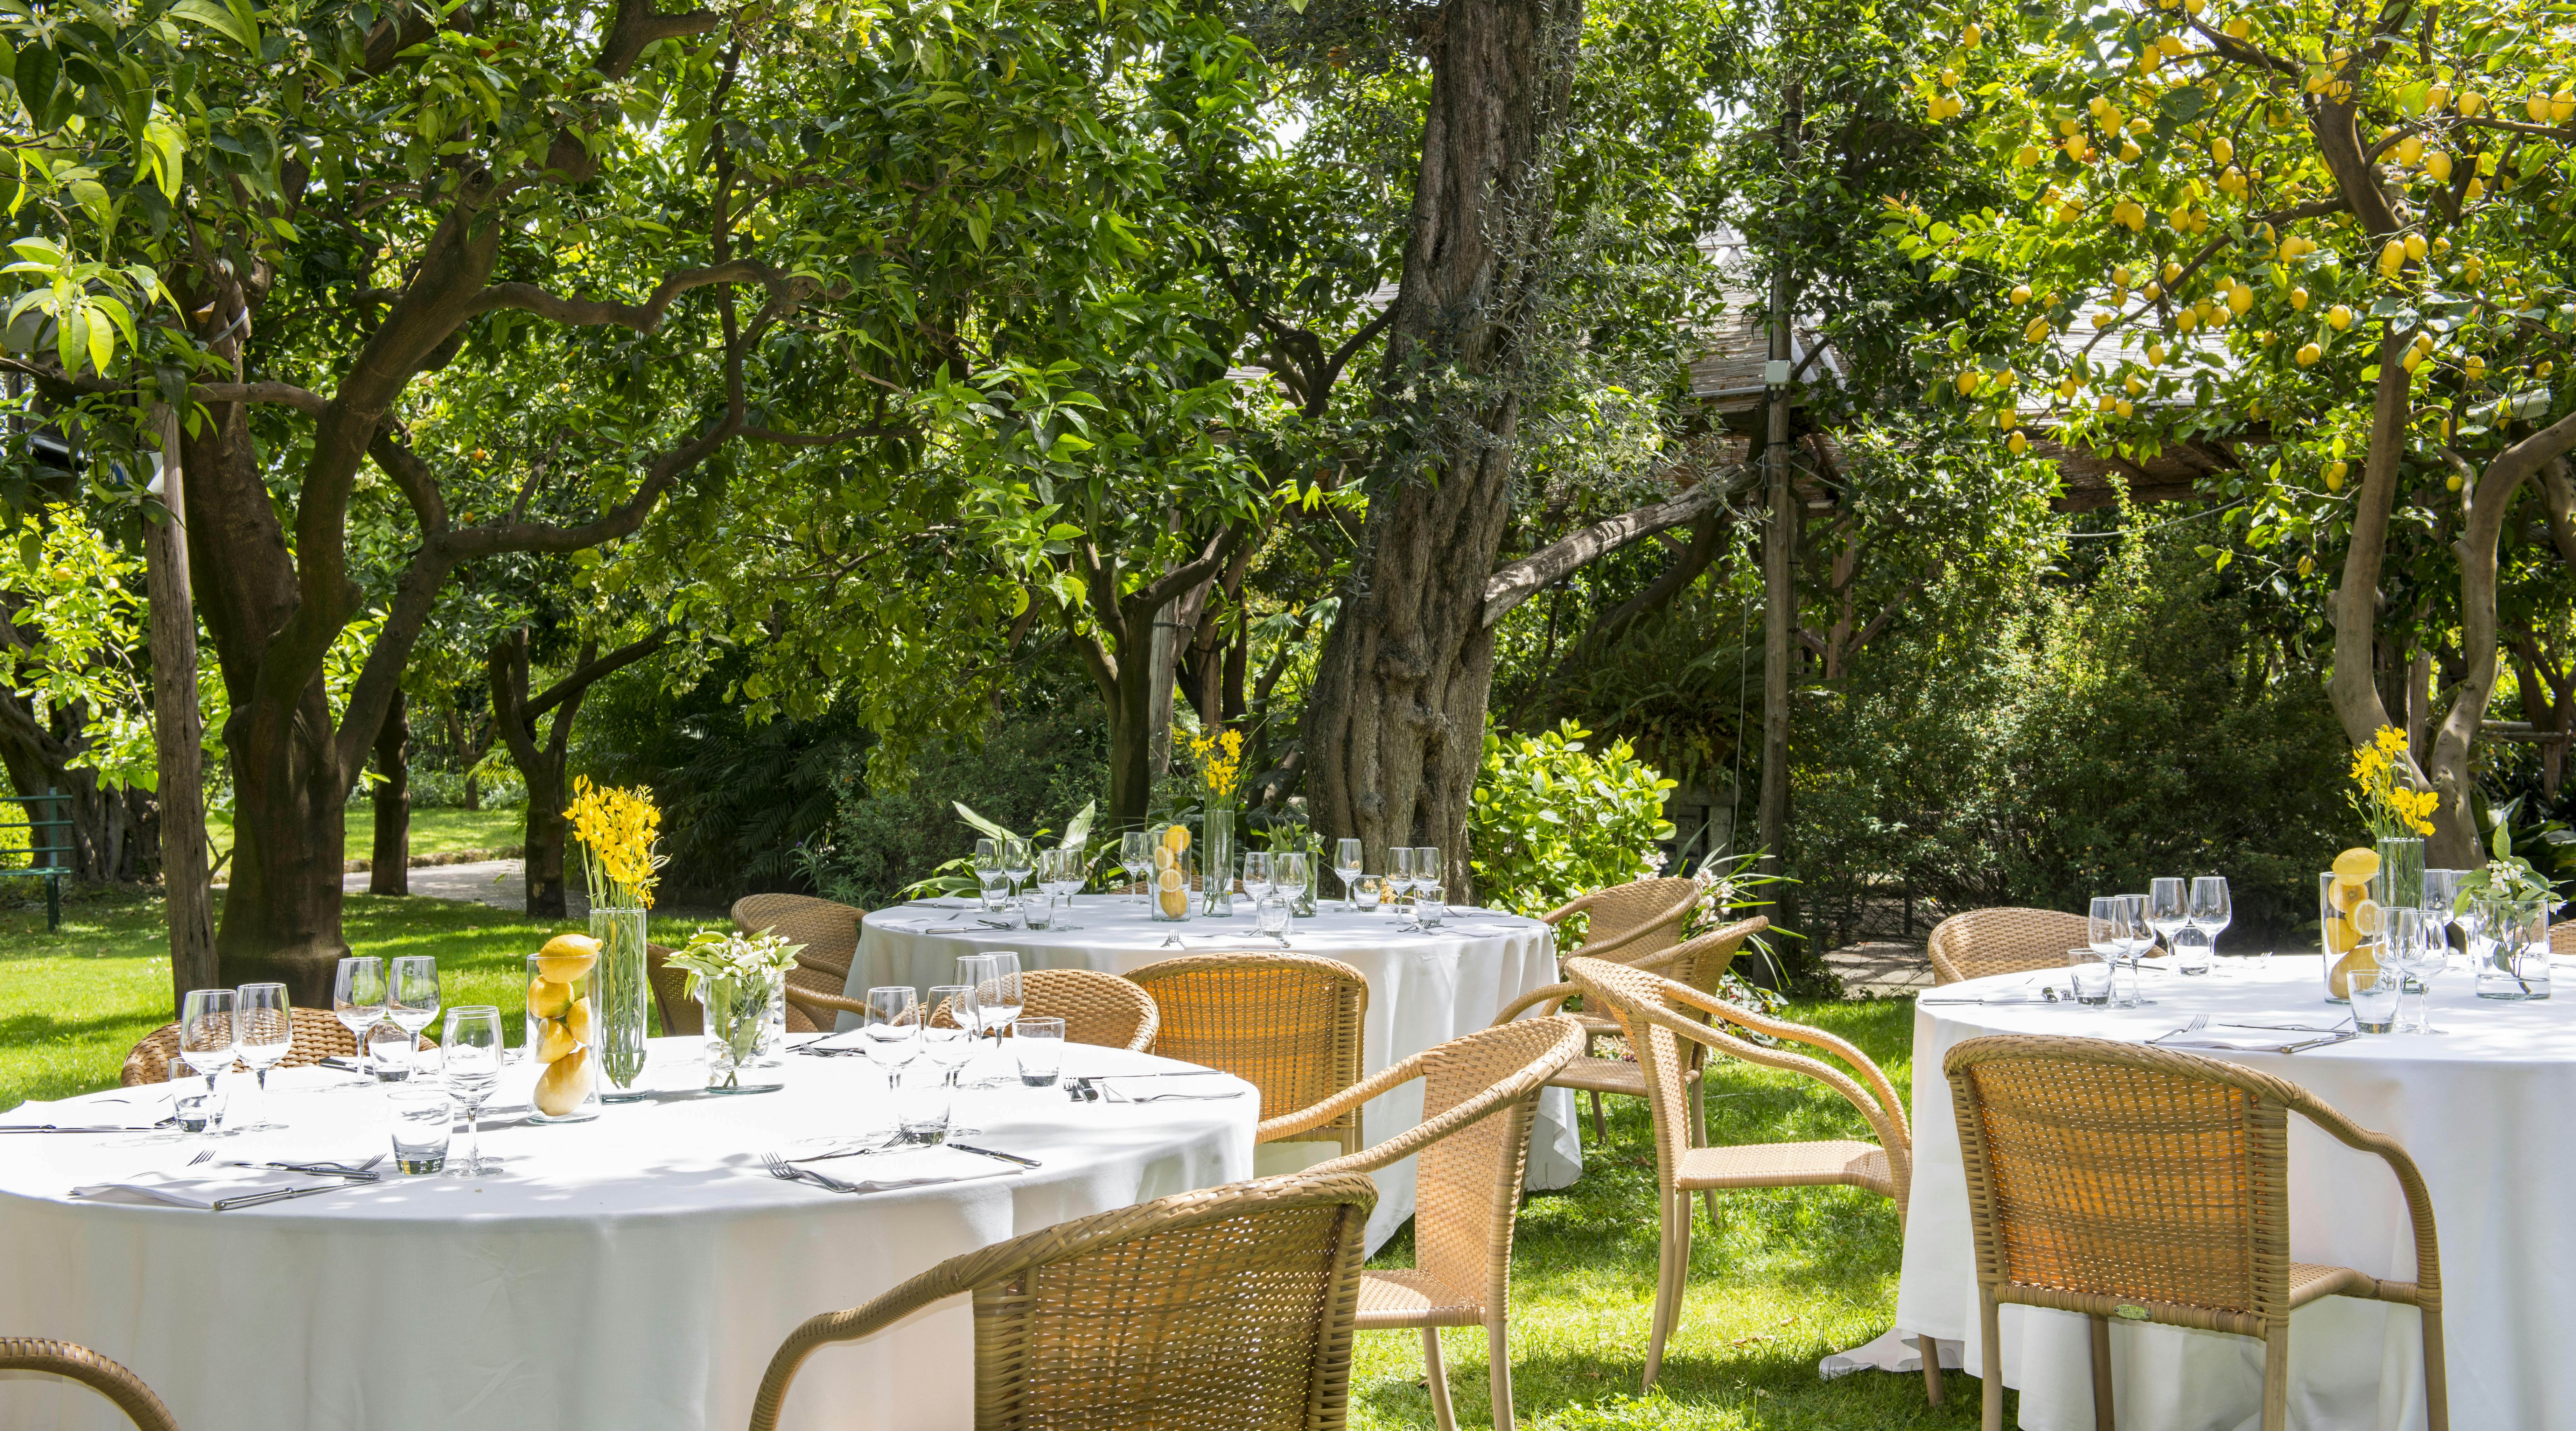 Tables with white appliances in the outdoor garden with trees